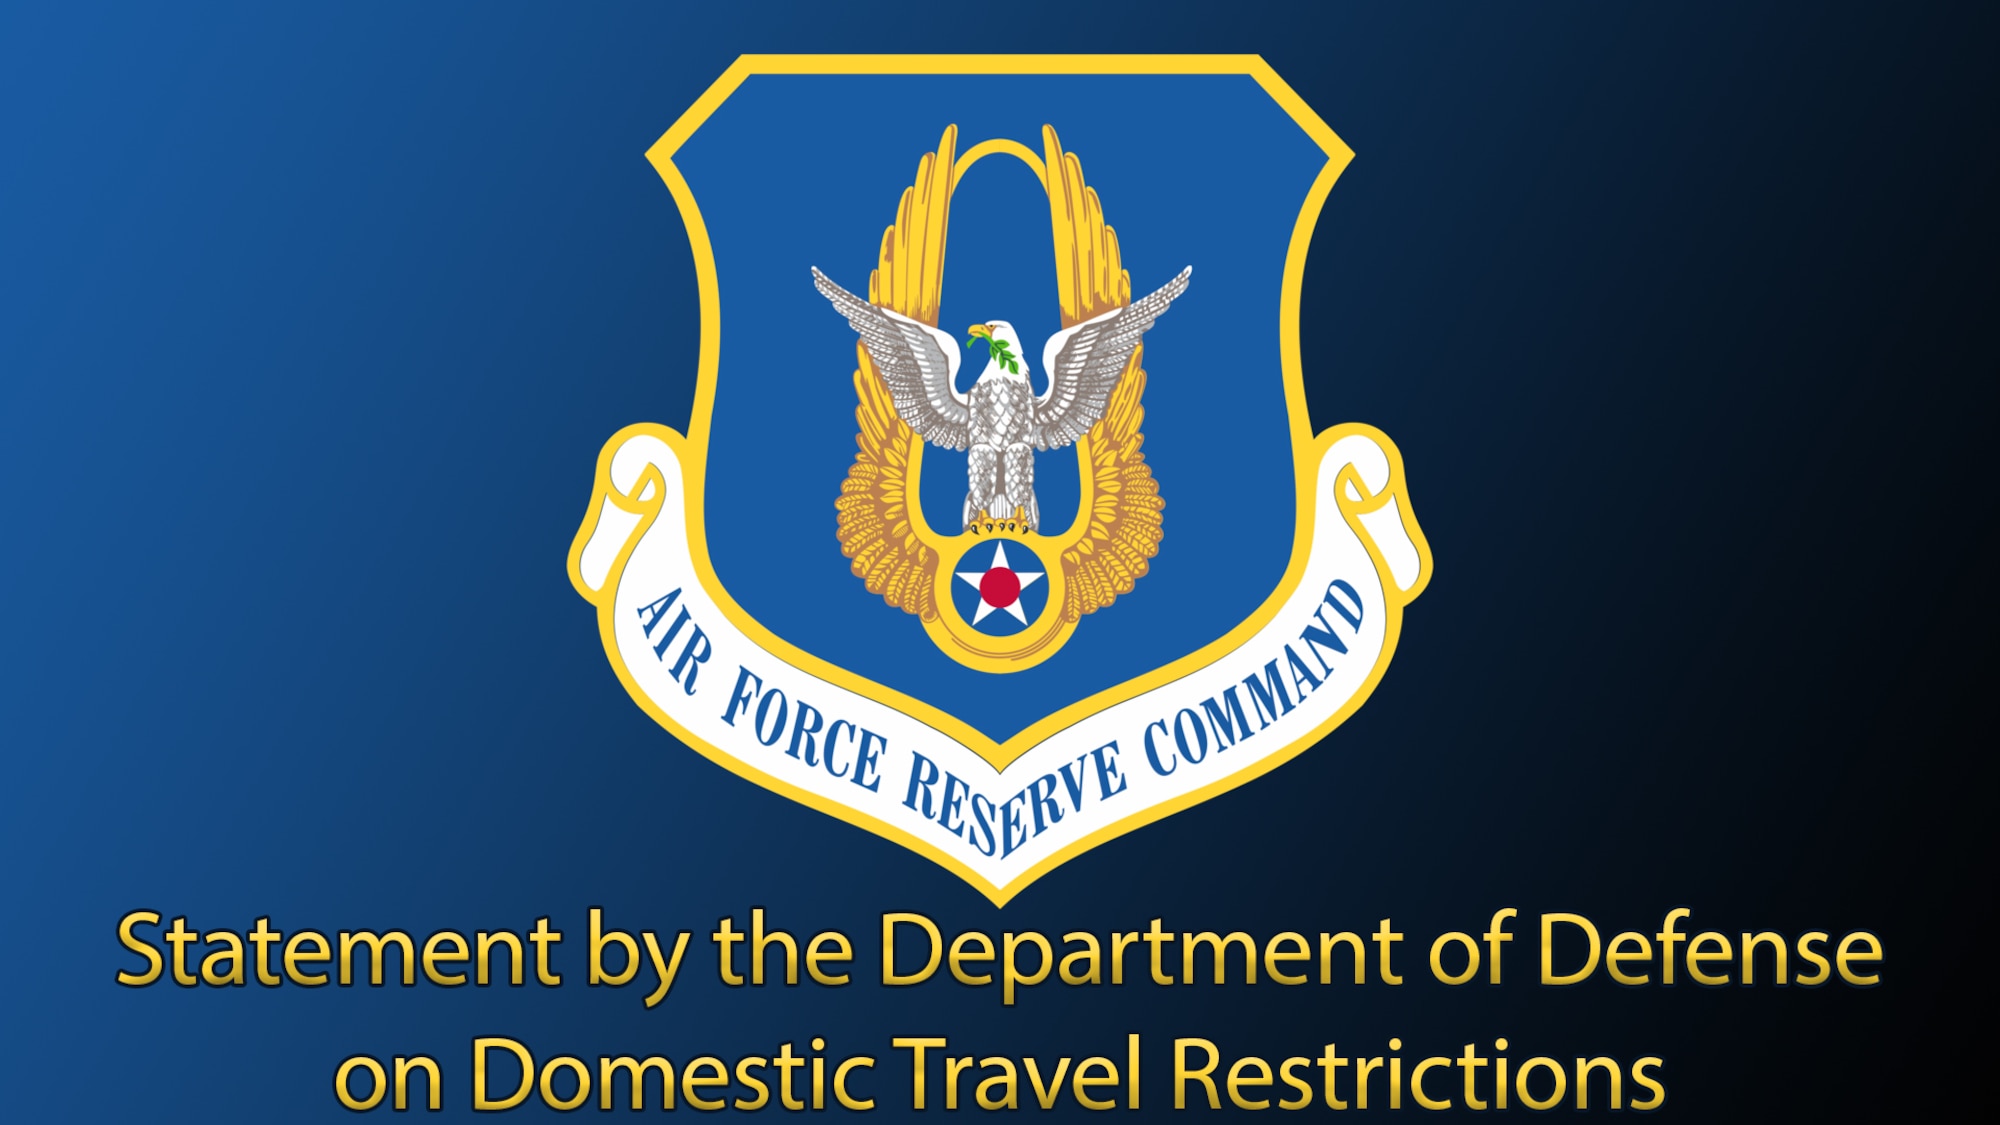 Graphic with AFRC shield and text that reads Statement by the Department of Defense on Domestic Travel Restrictions